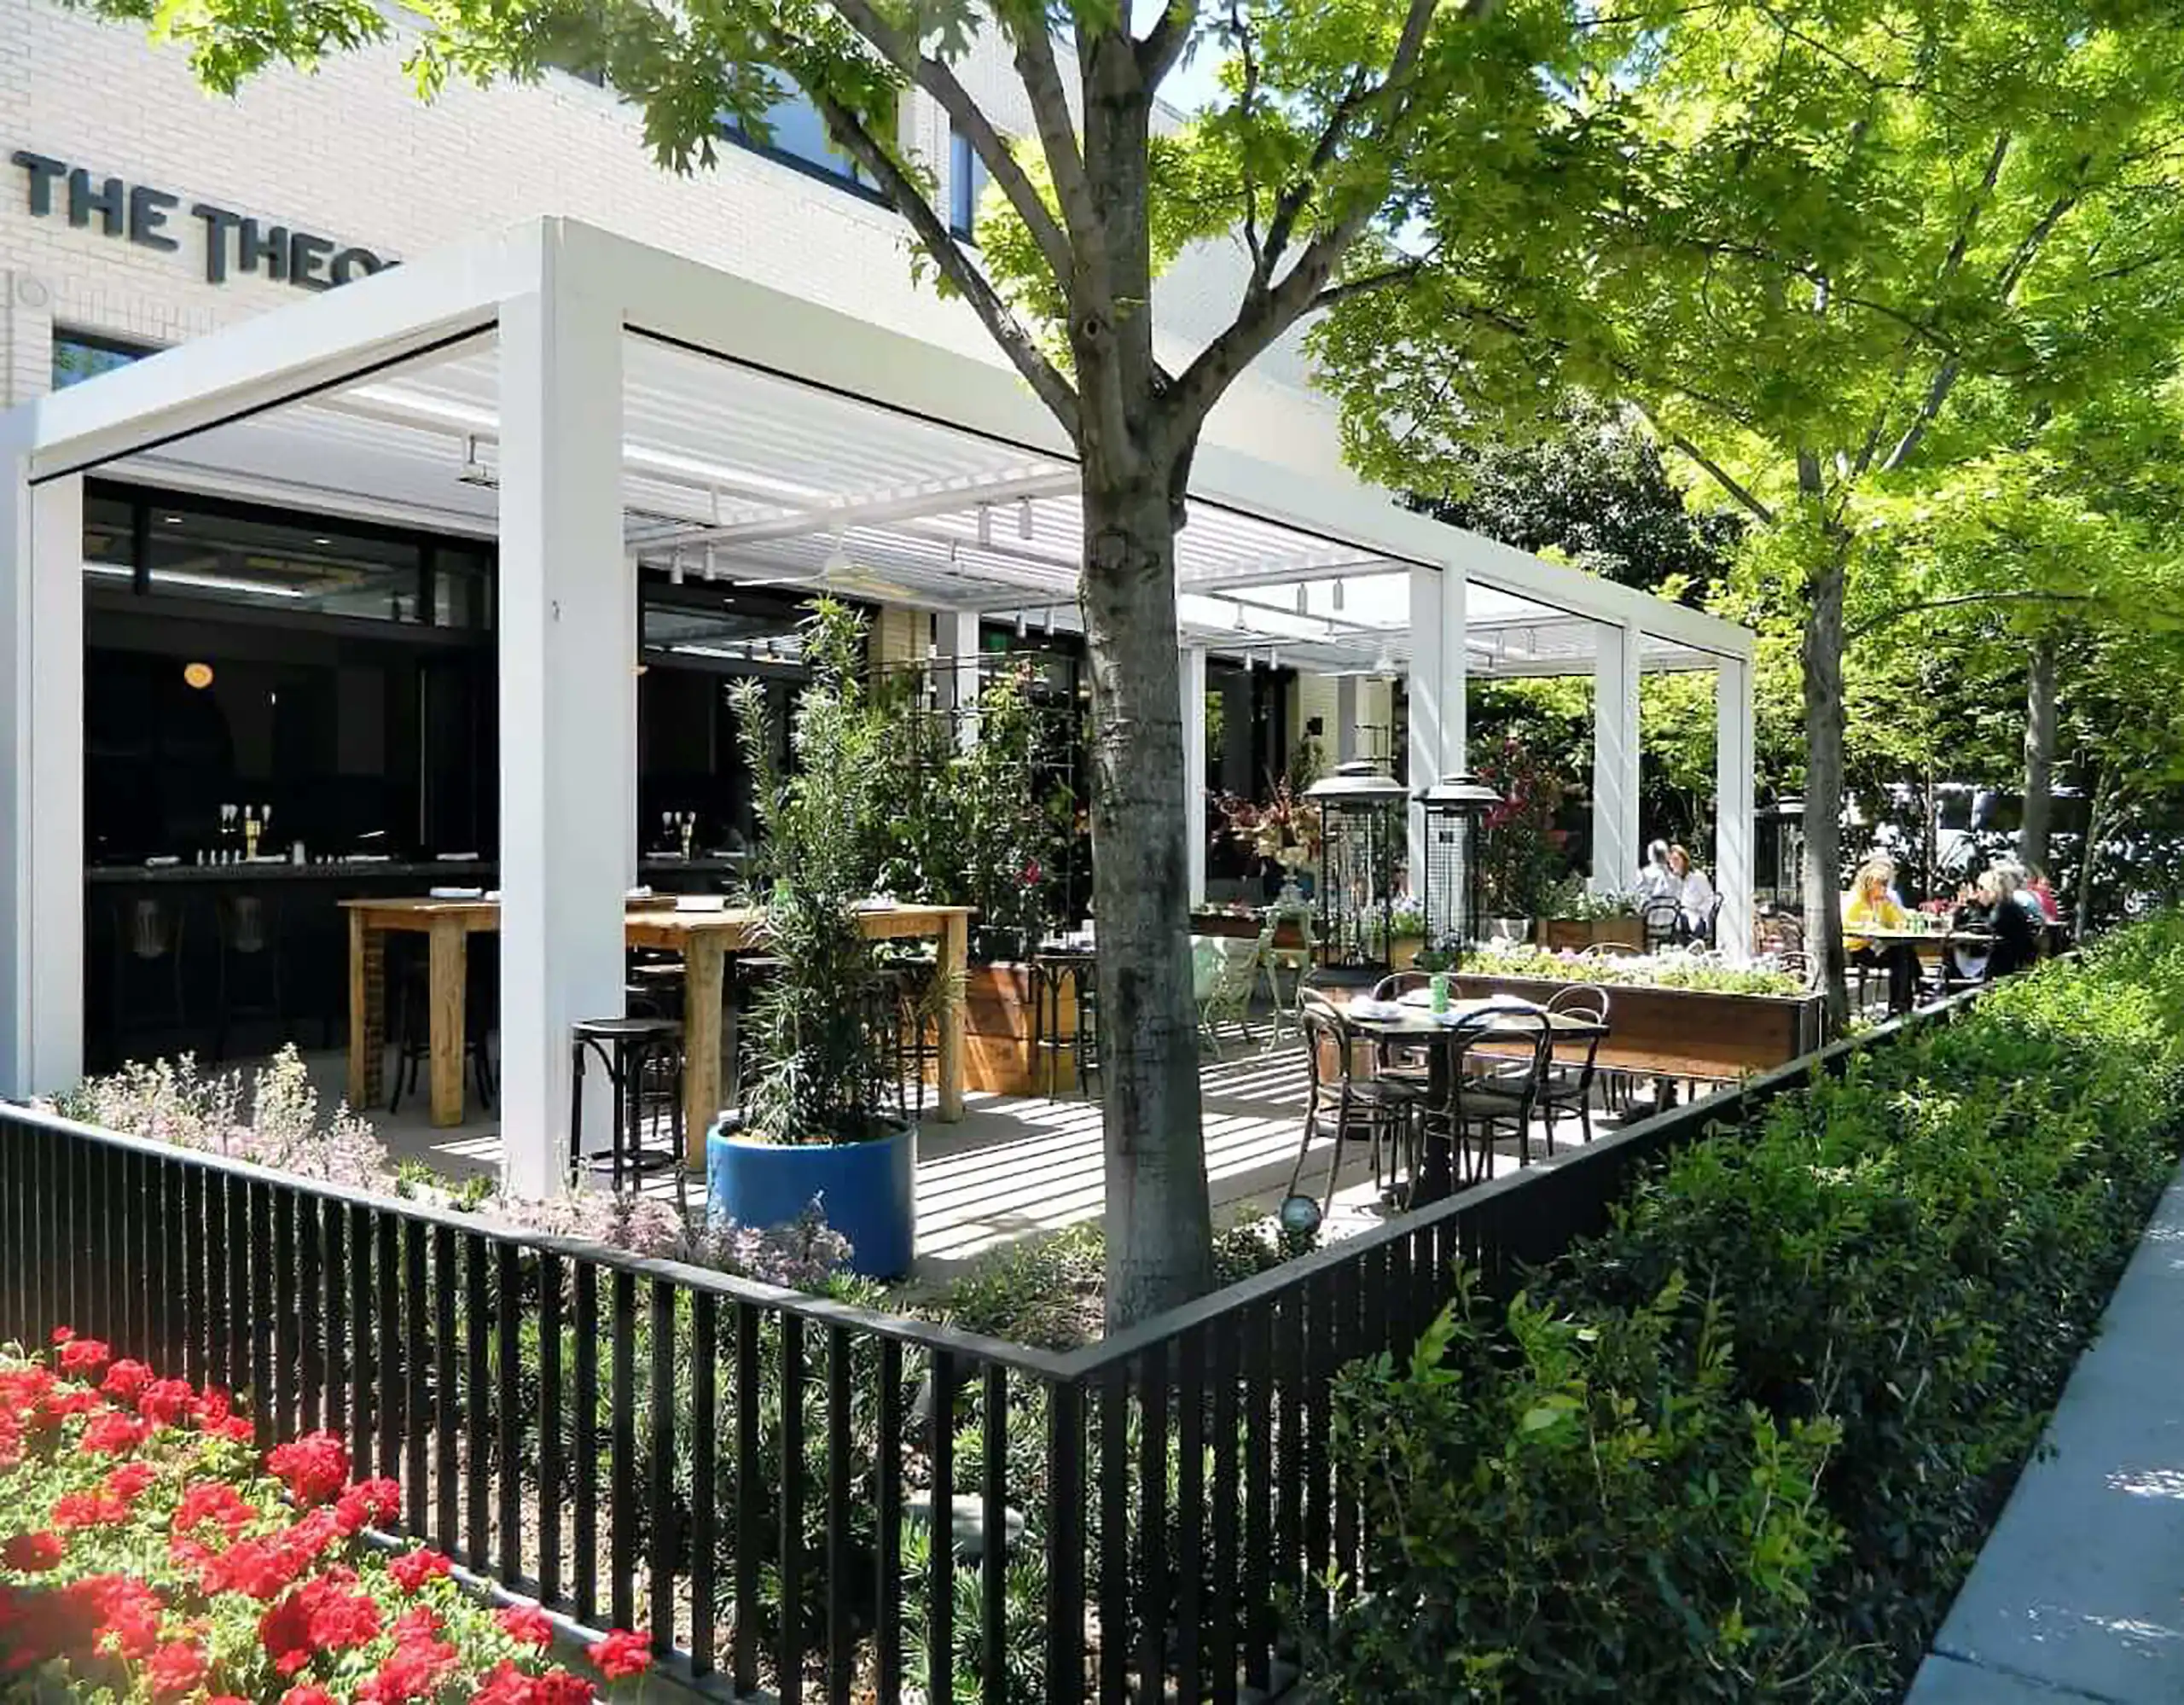 Photo of a StruXure Pivot 6 Pergola with a louvered roof that covers an outdoor dining and drinking area of a business